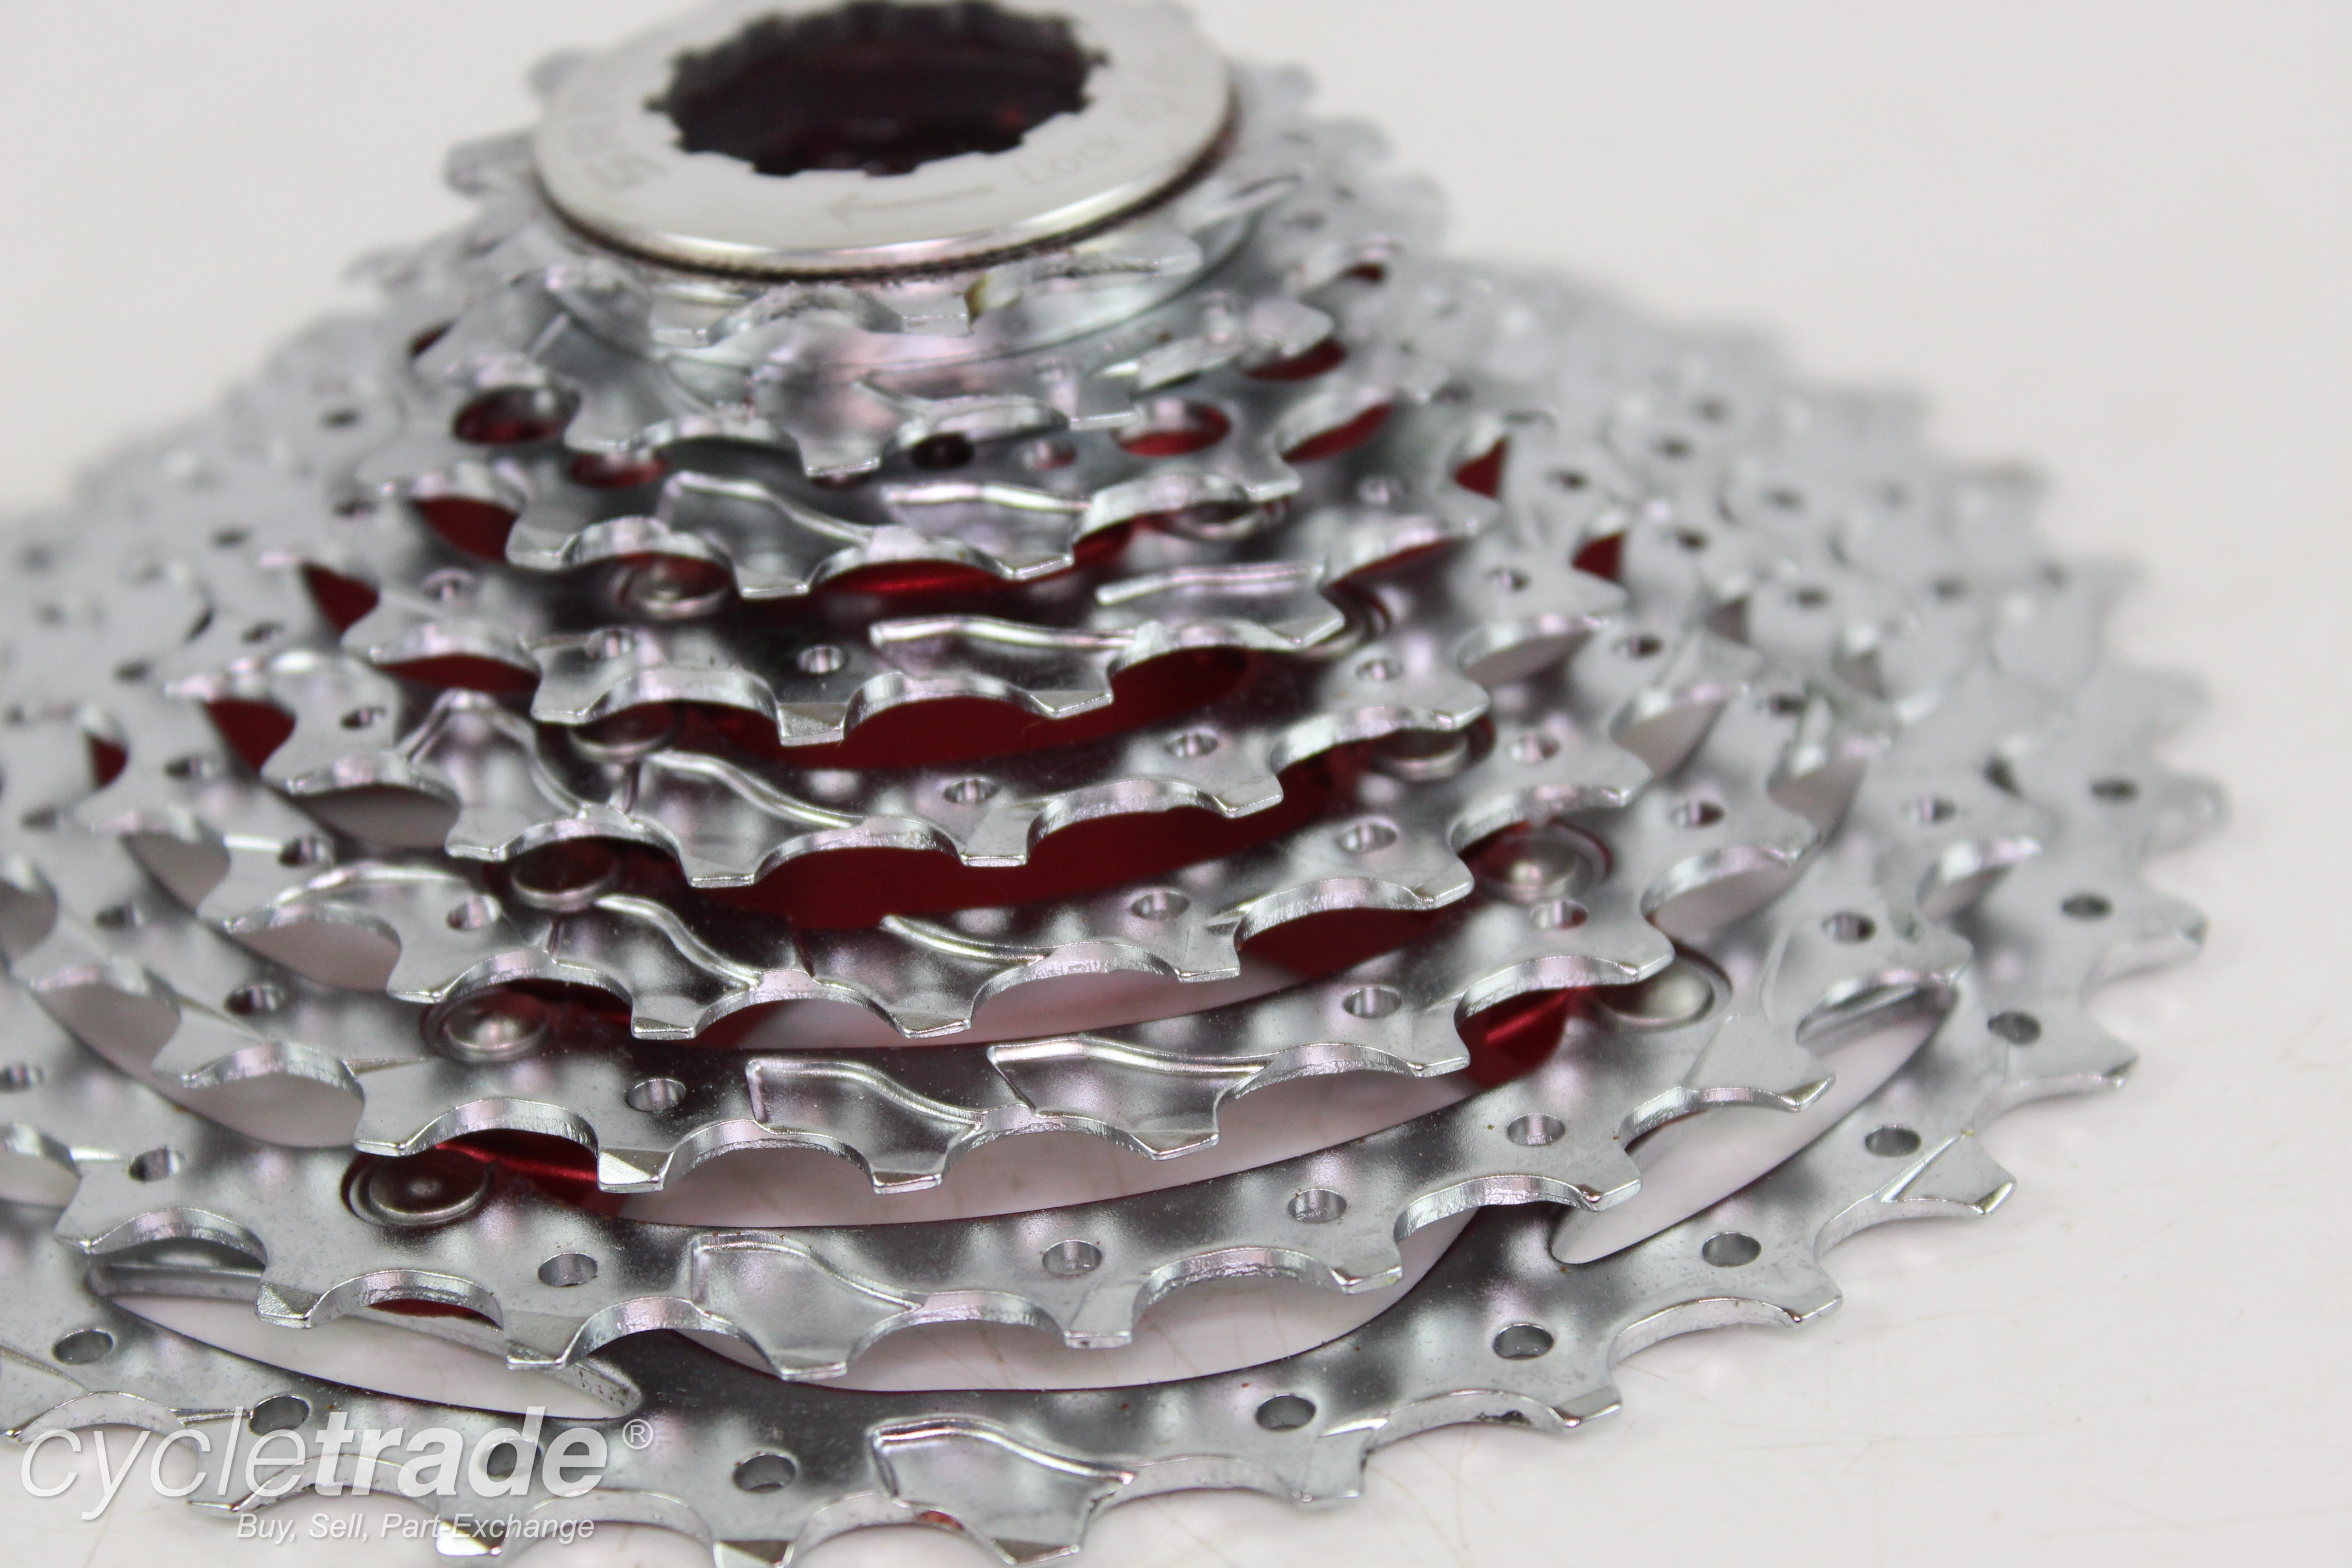 Cassette - SRAM PG990, 9 Speed in Red, 11-34T - Grade A+ (New)